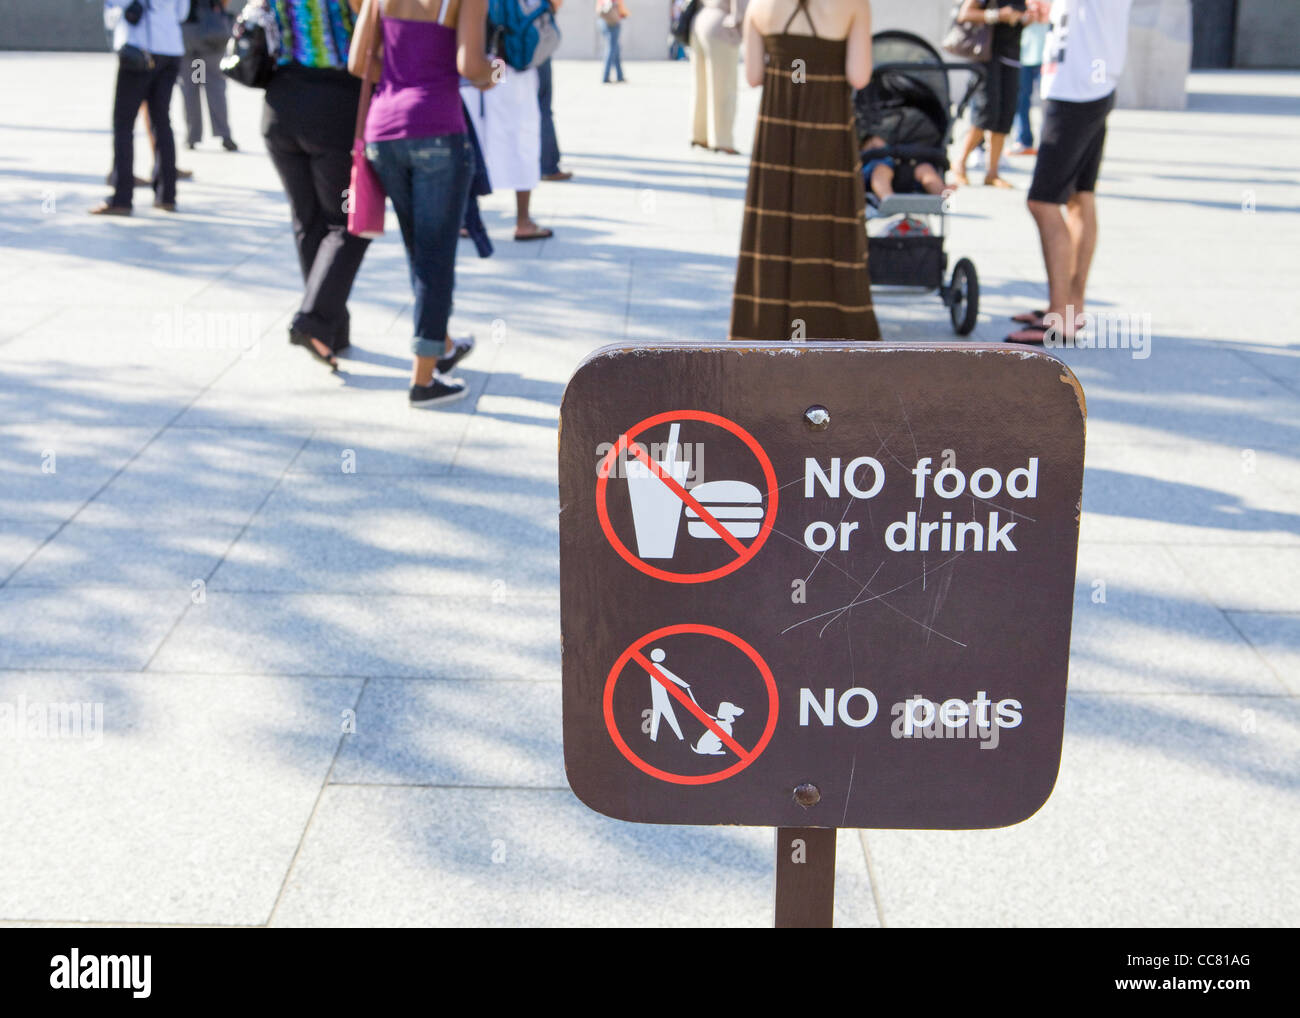 No food no pets sign in public space Stock Photo